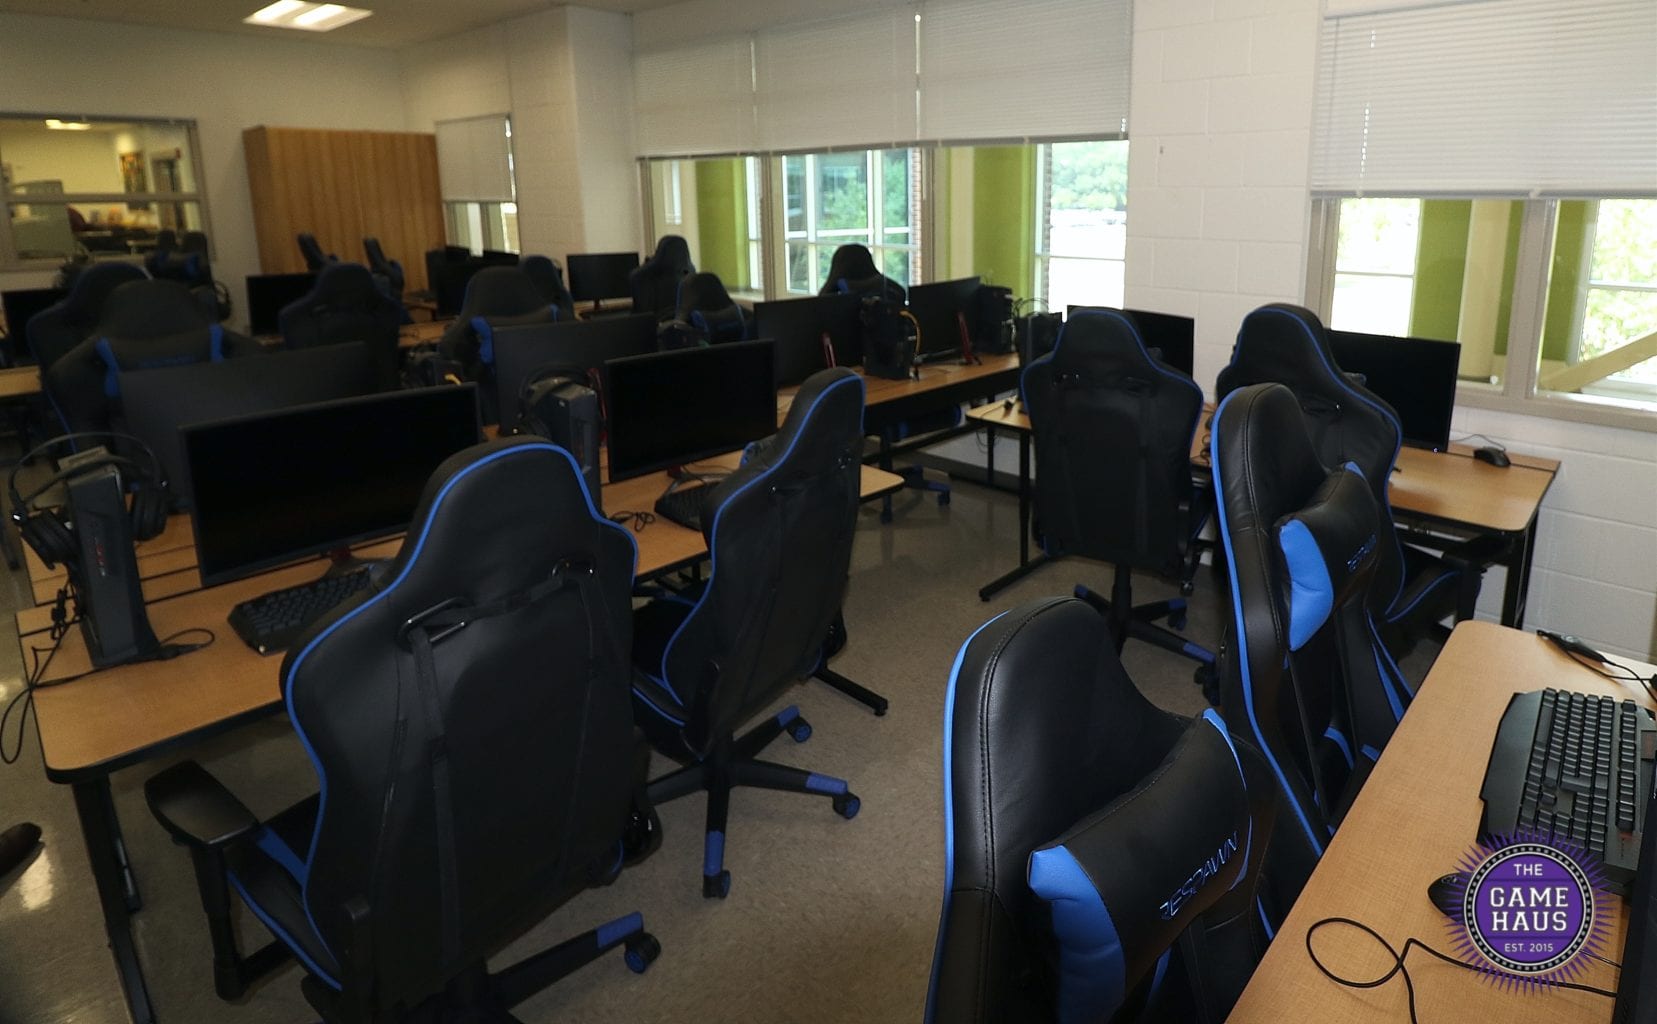 Louisa County High School built an esports lab in preparation for the 2019-2020 season (photo by Love Marketing Agency).